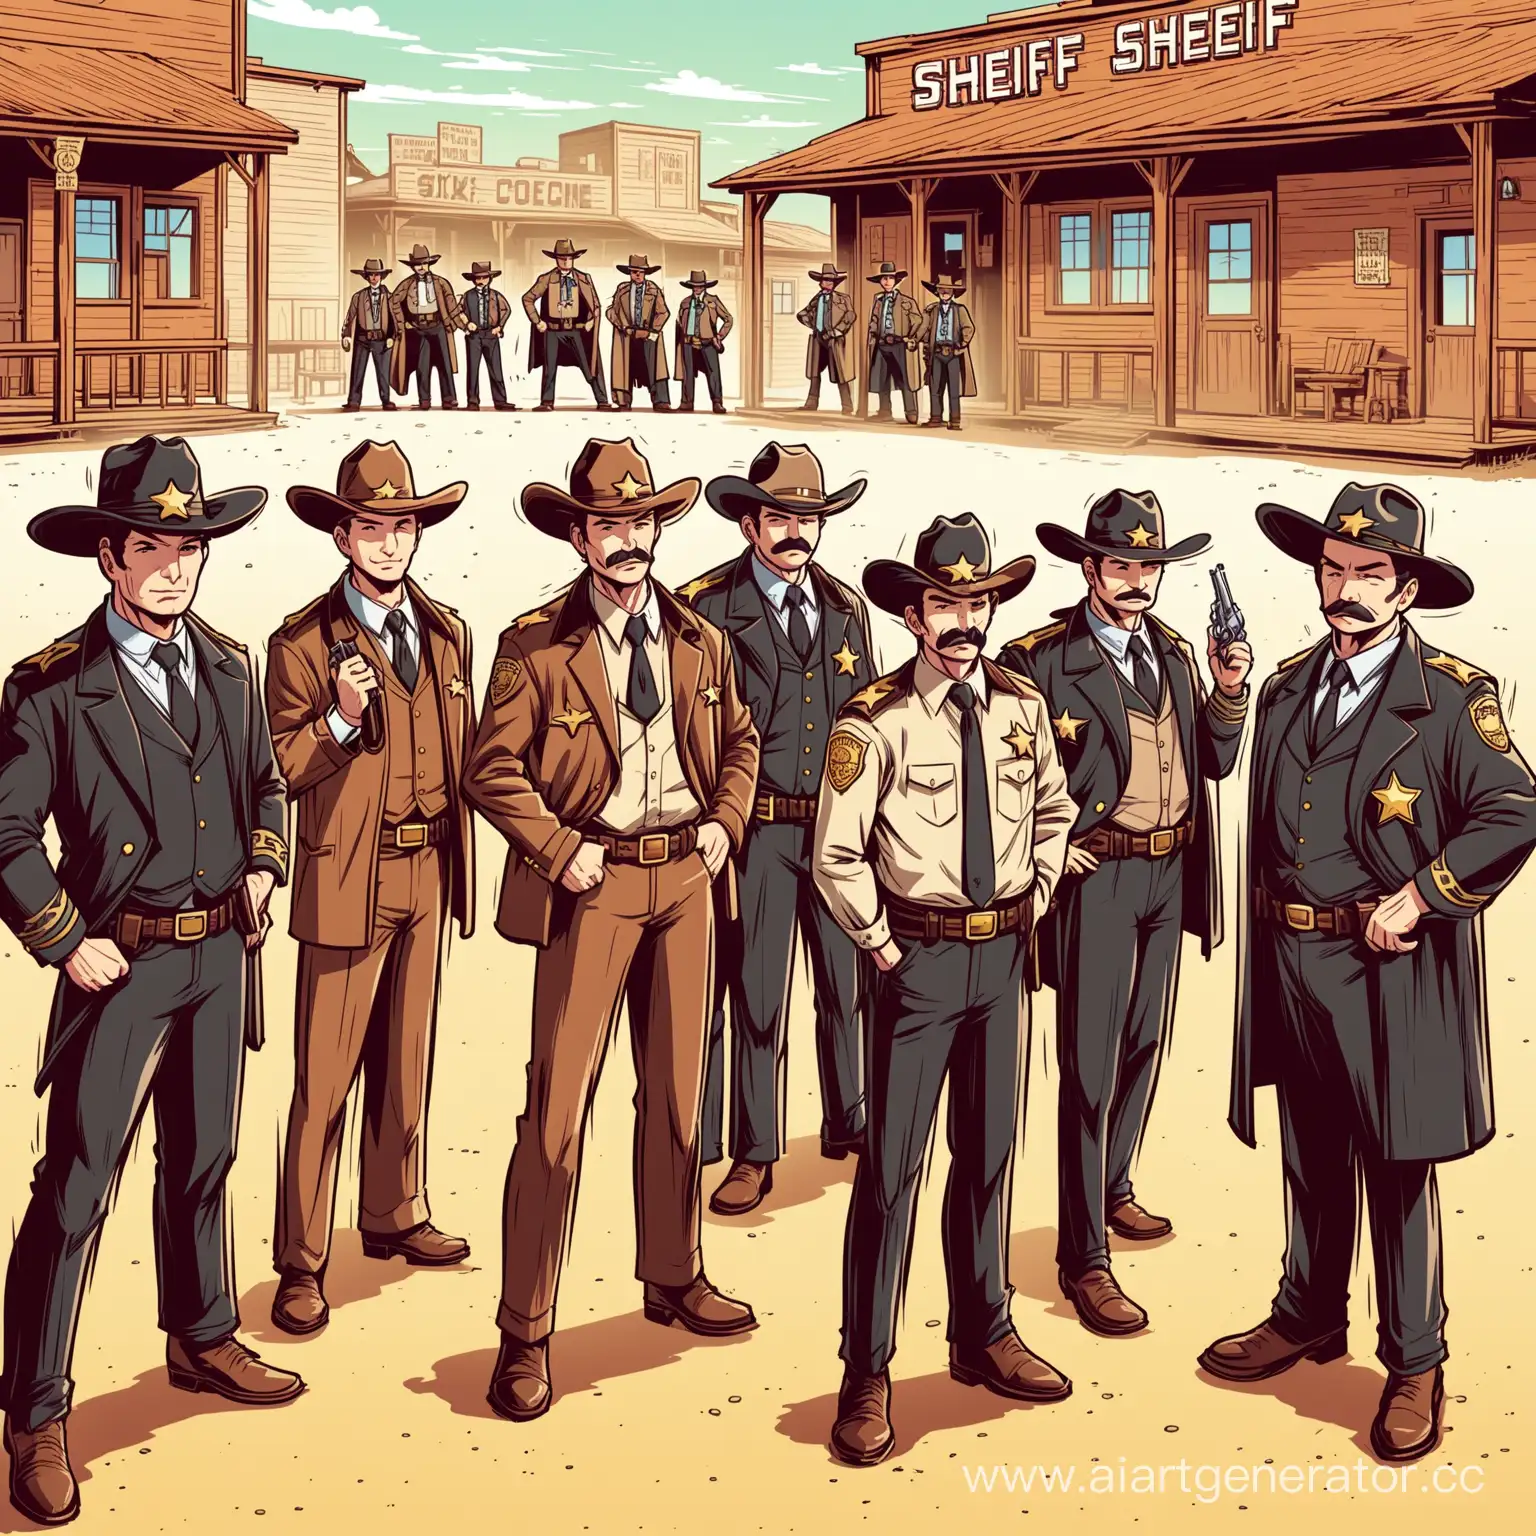 comix style sheriff, mayor, two detective, six cowboys and three policemans